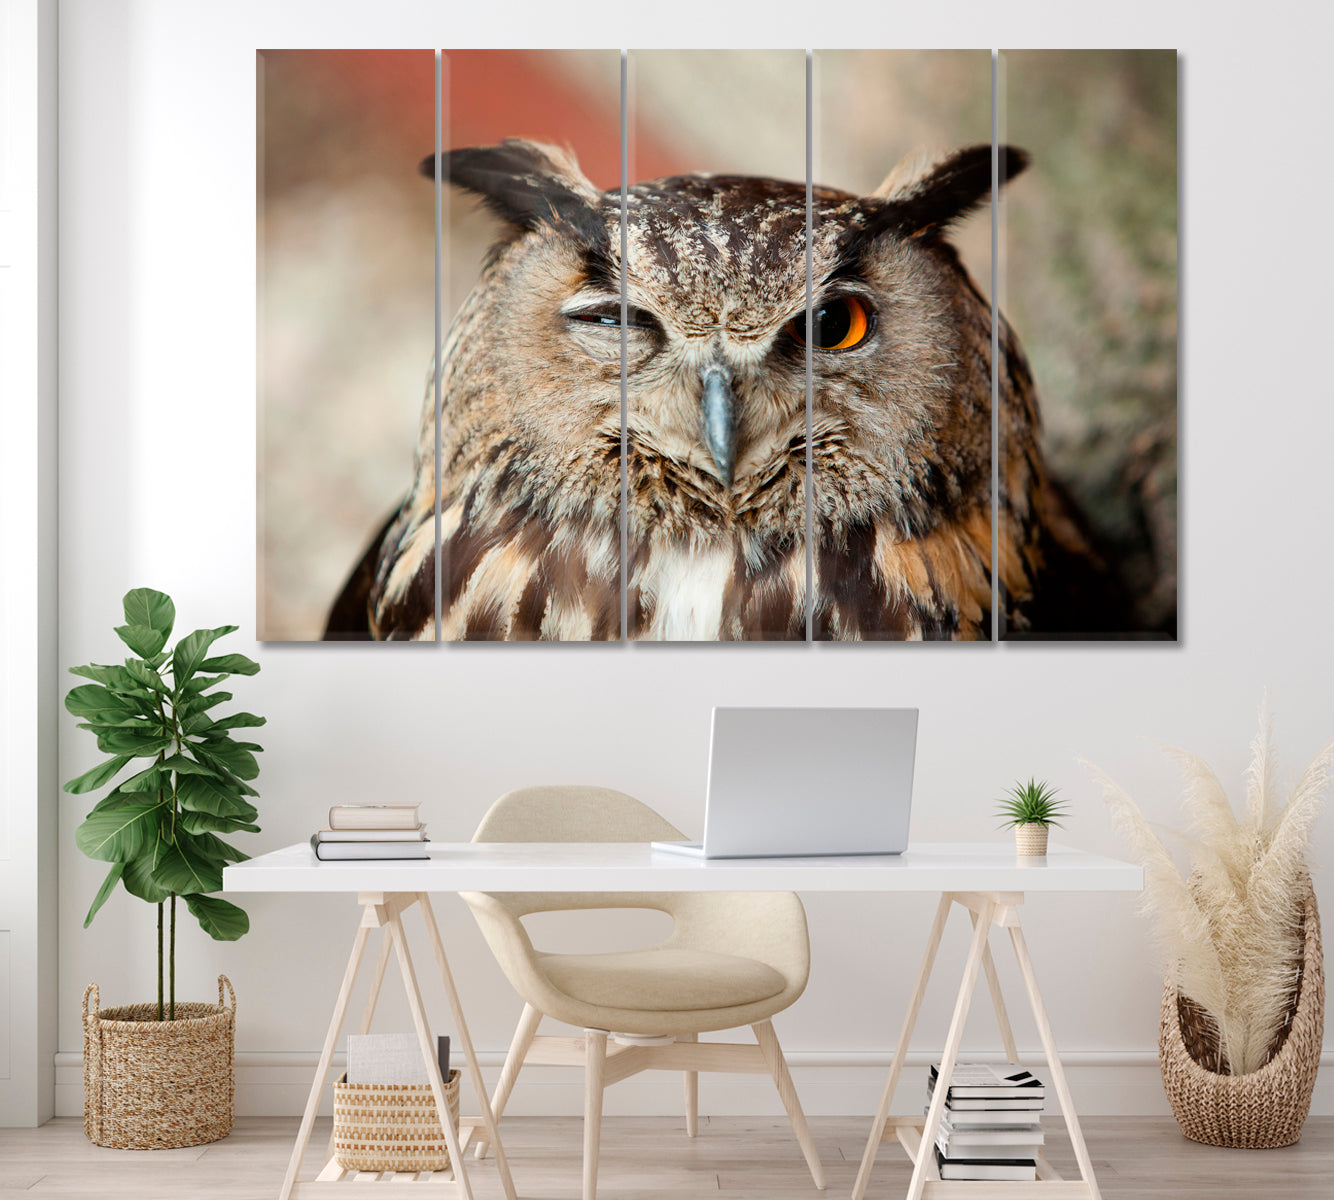 Funny Winking Owl Canvas Print ArtLexy 5 Panels 36"x24" inches 